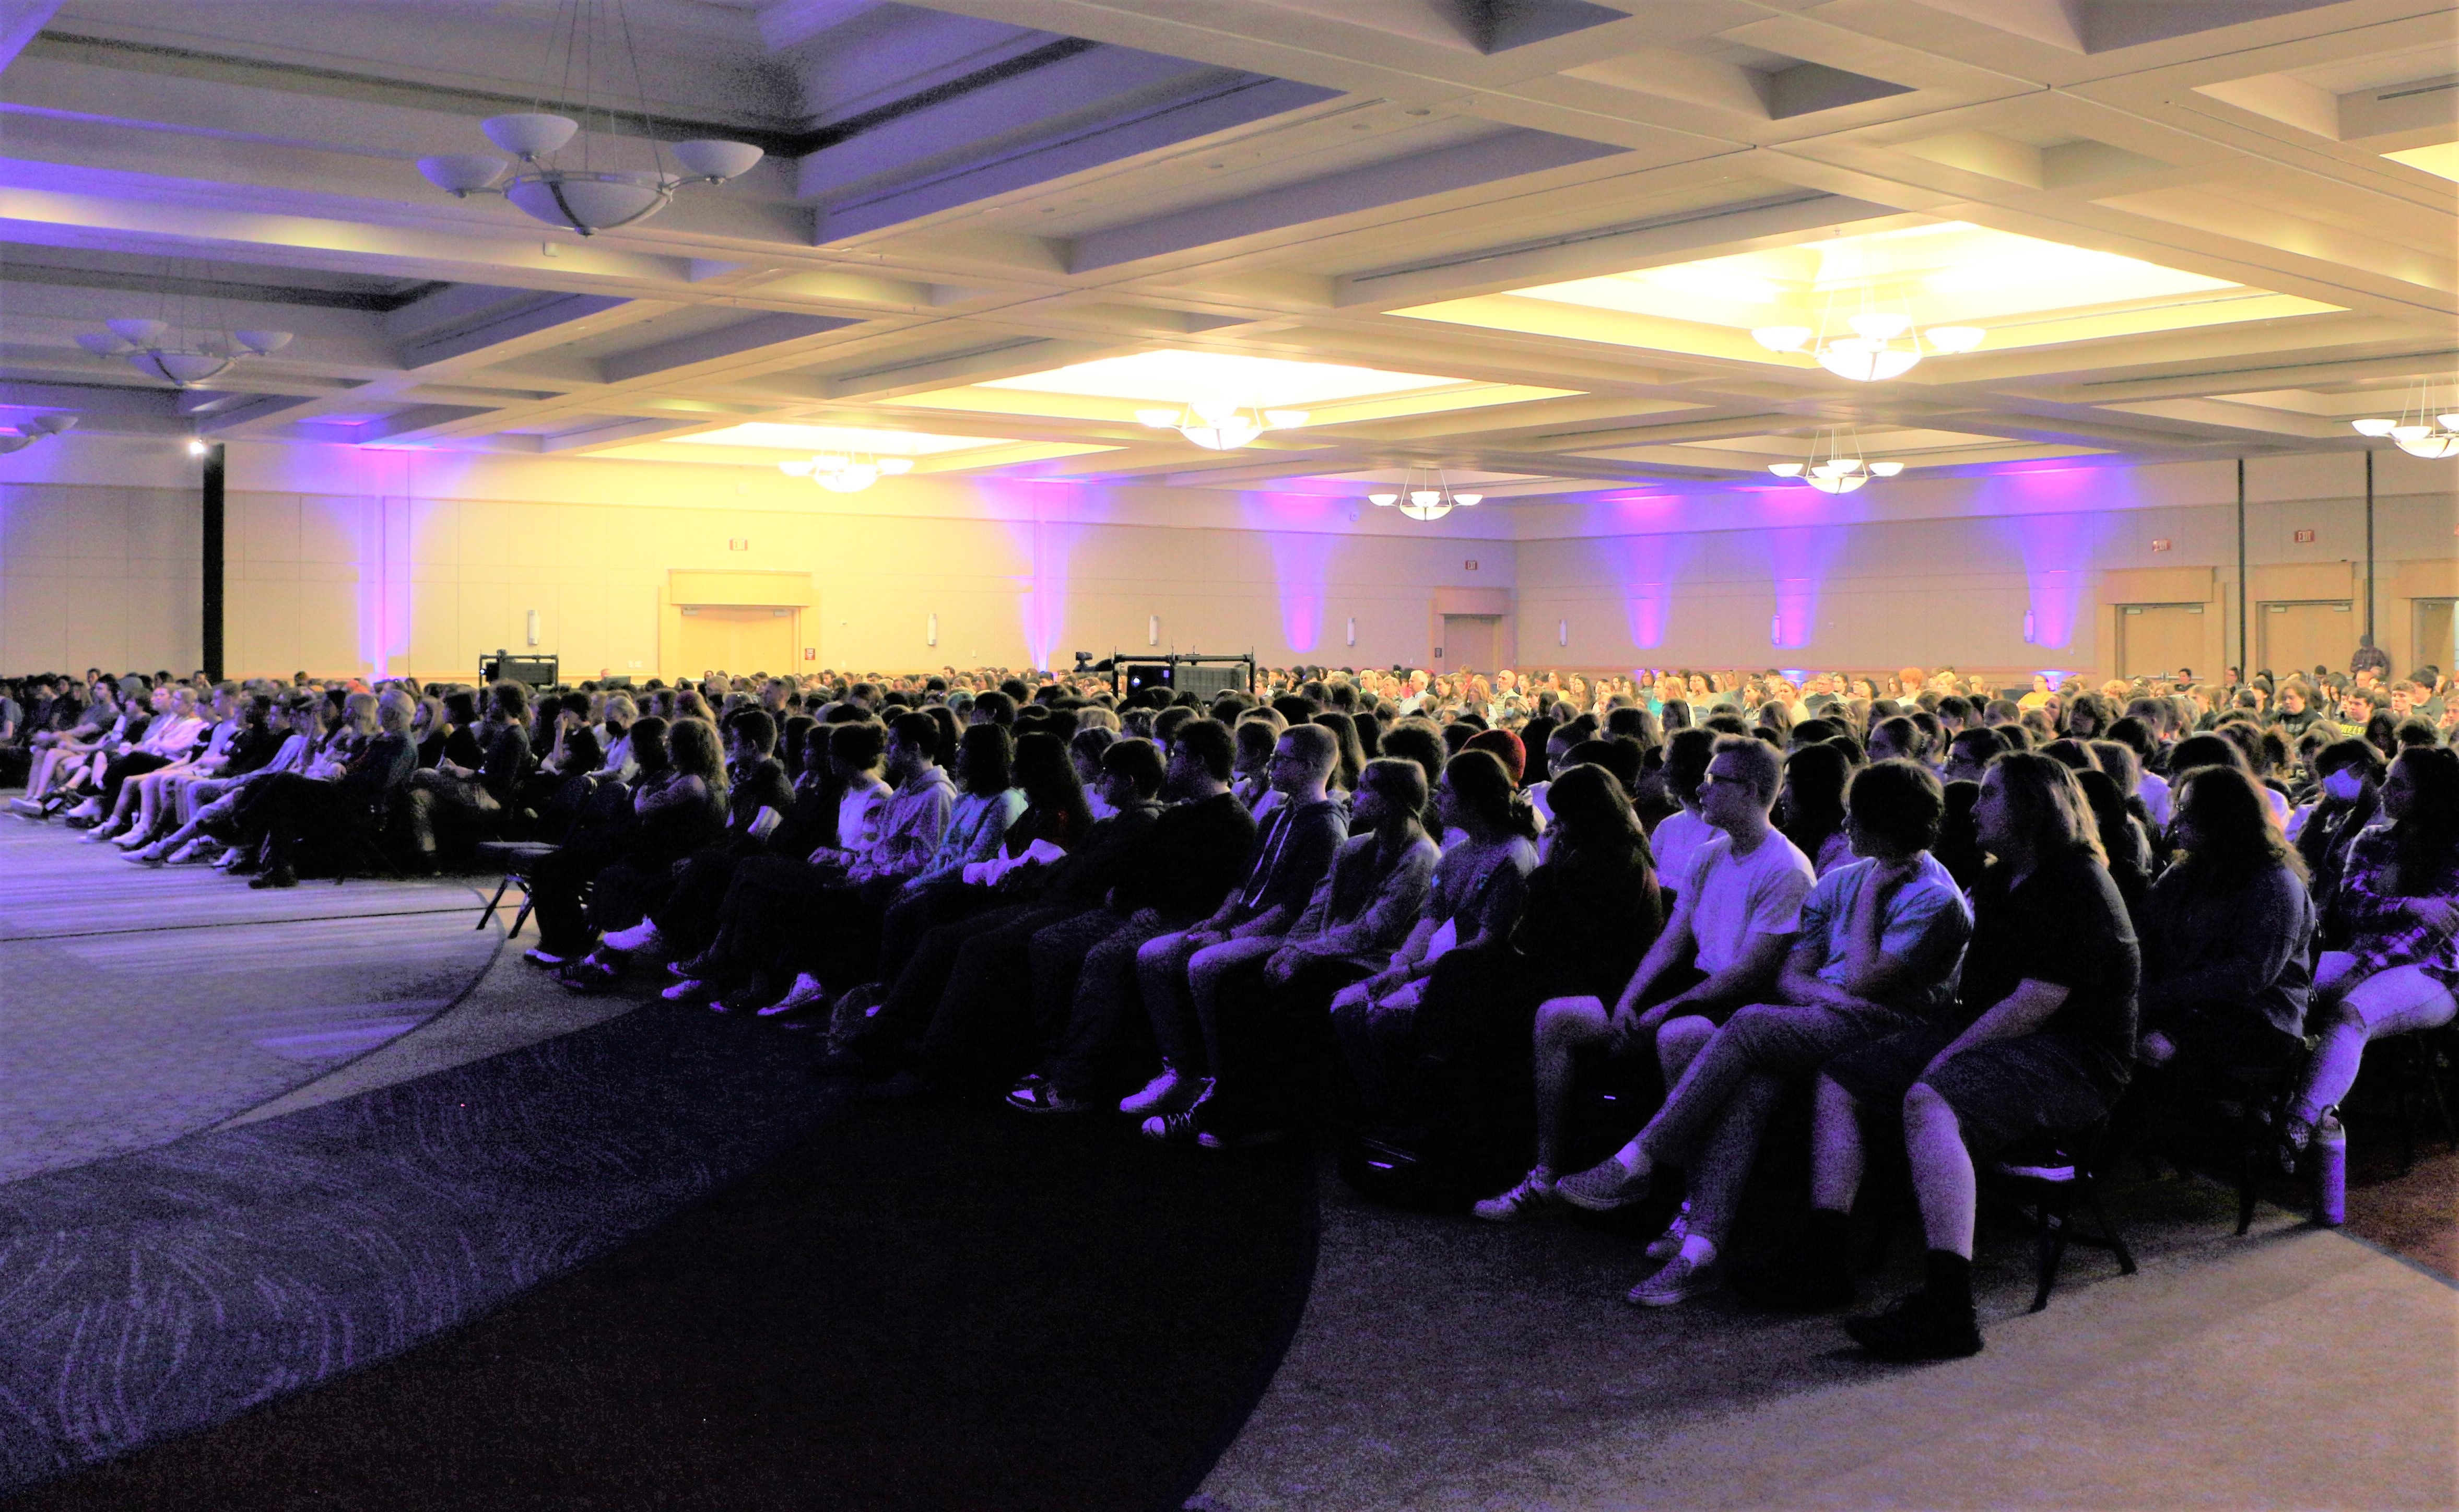 Photograph of a large crowd of people sitting and watching a presentation in a large room.